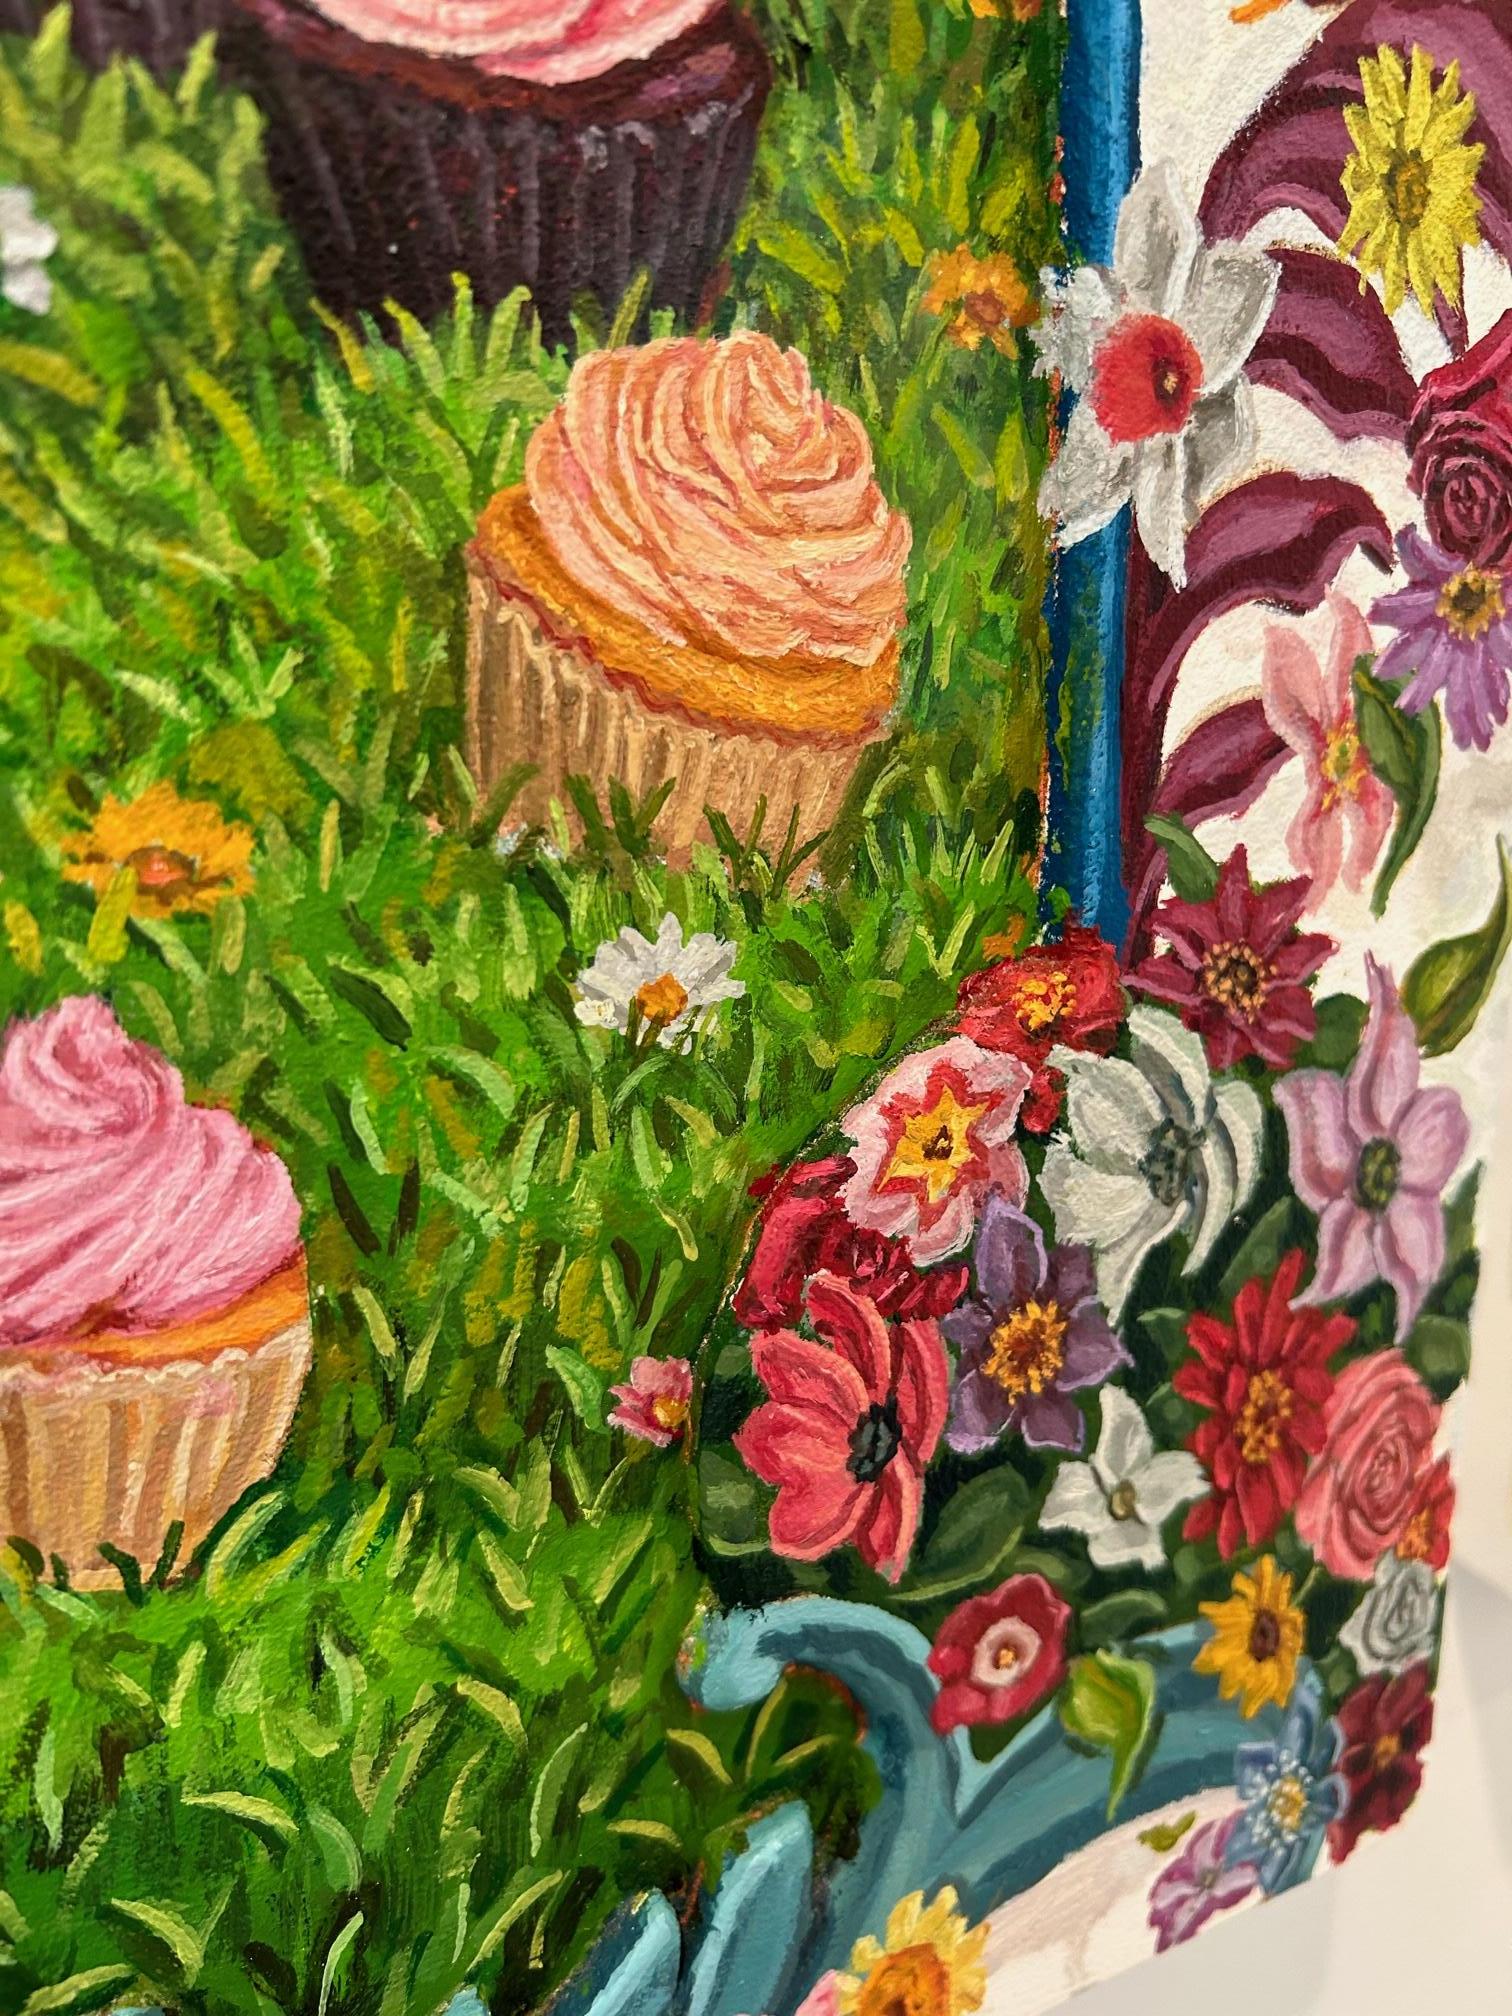 Cupcakes and Trees - Painting by Matt Jacobs